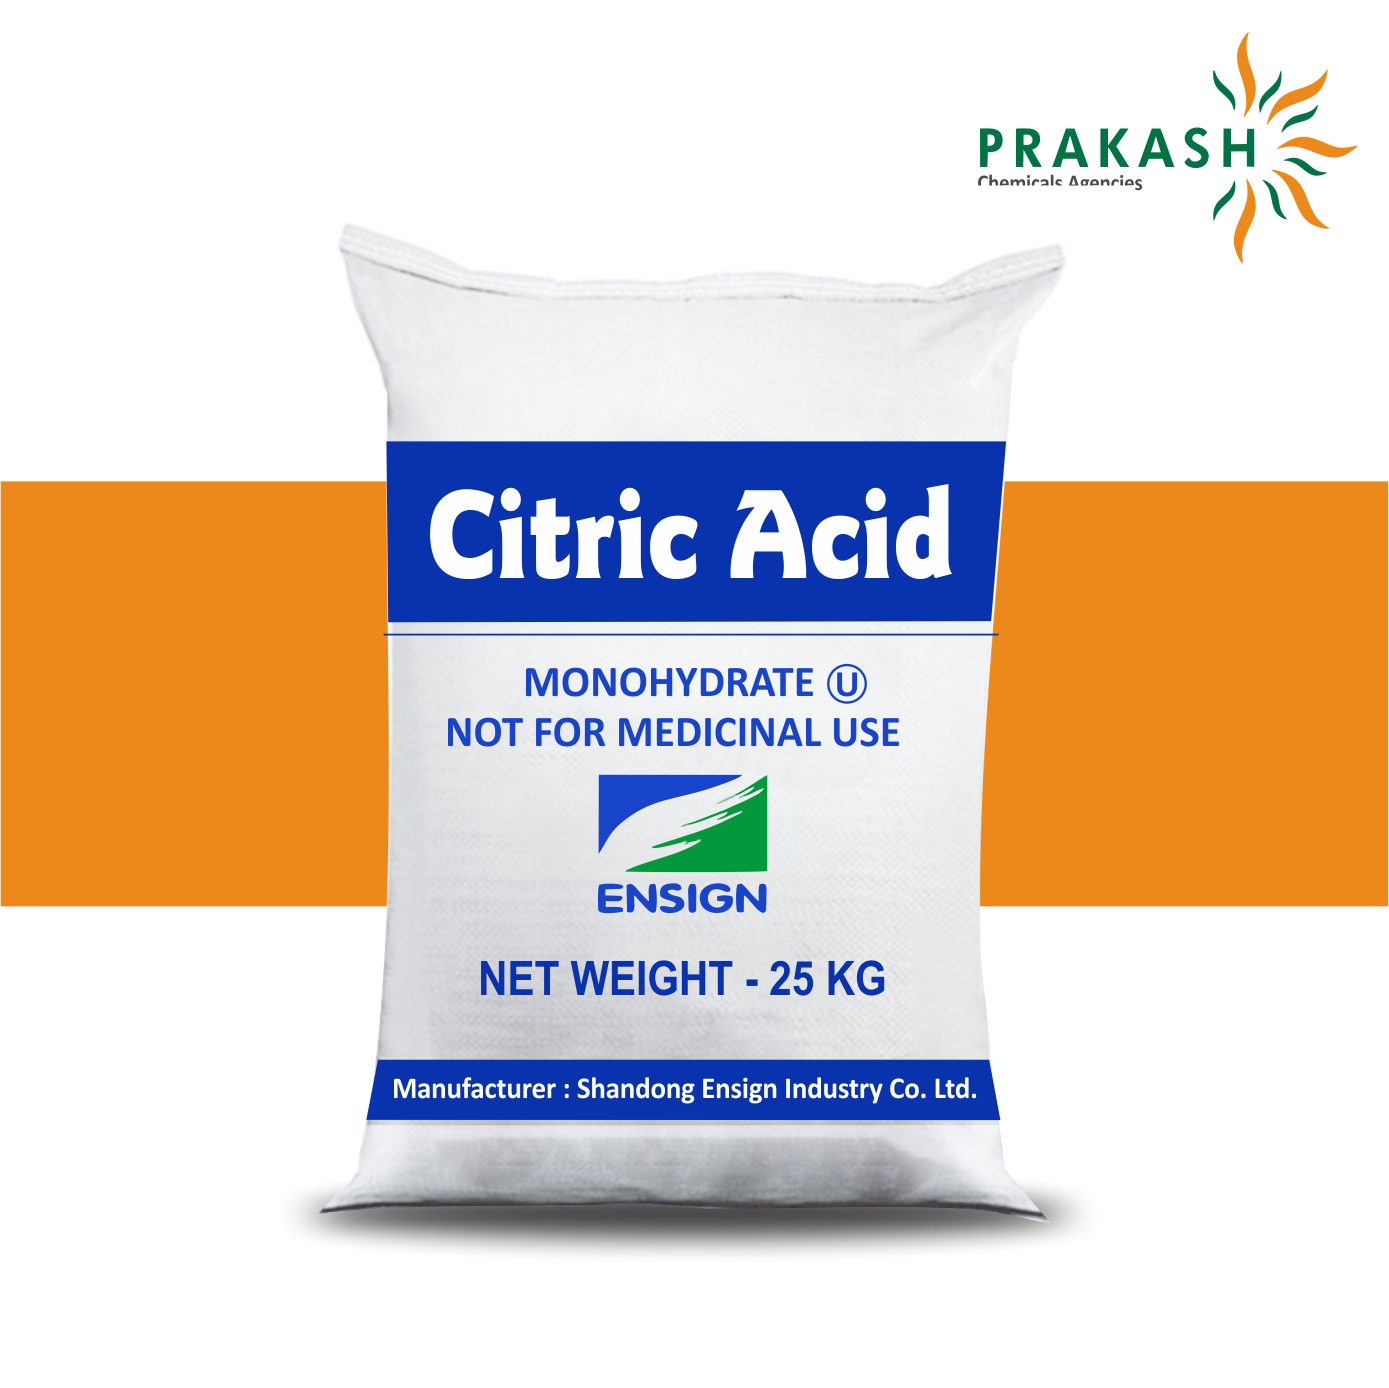 935147_Citric acid Monohydrate.png